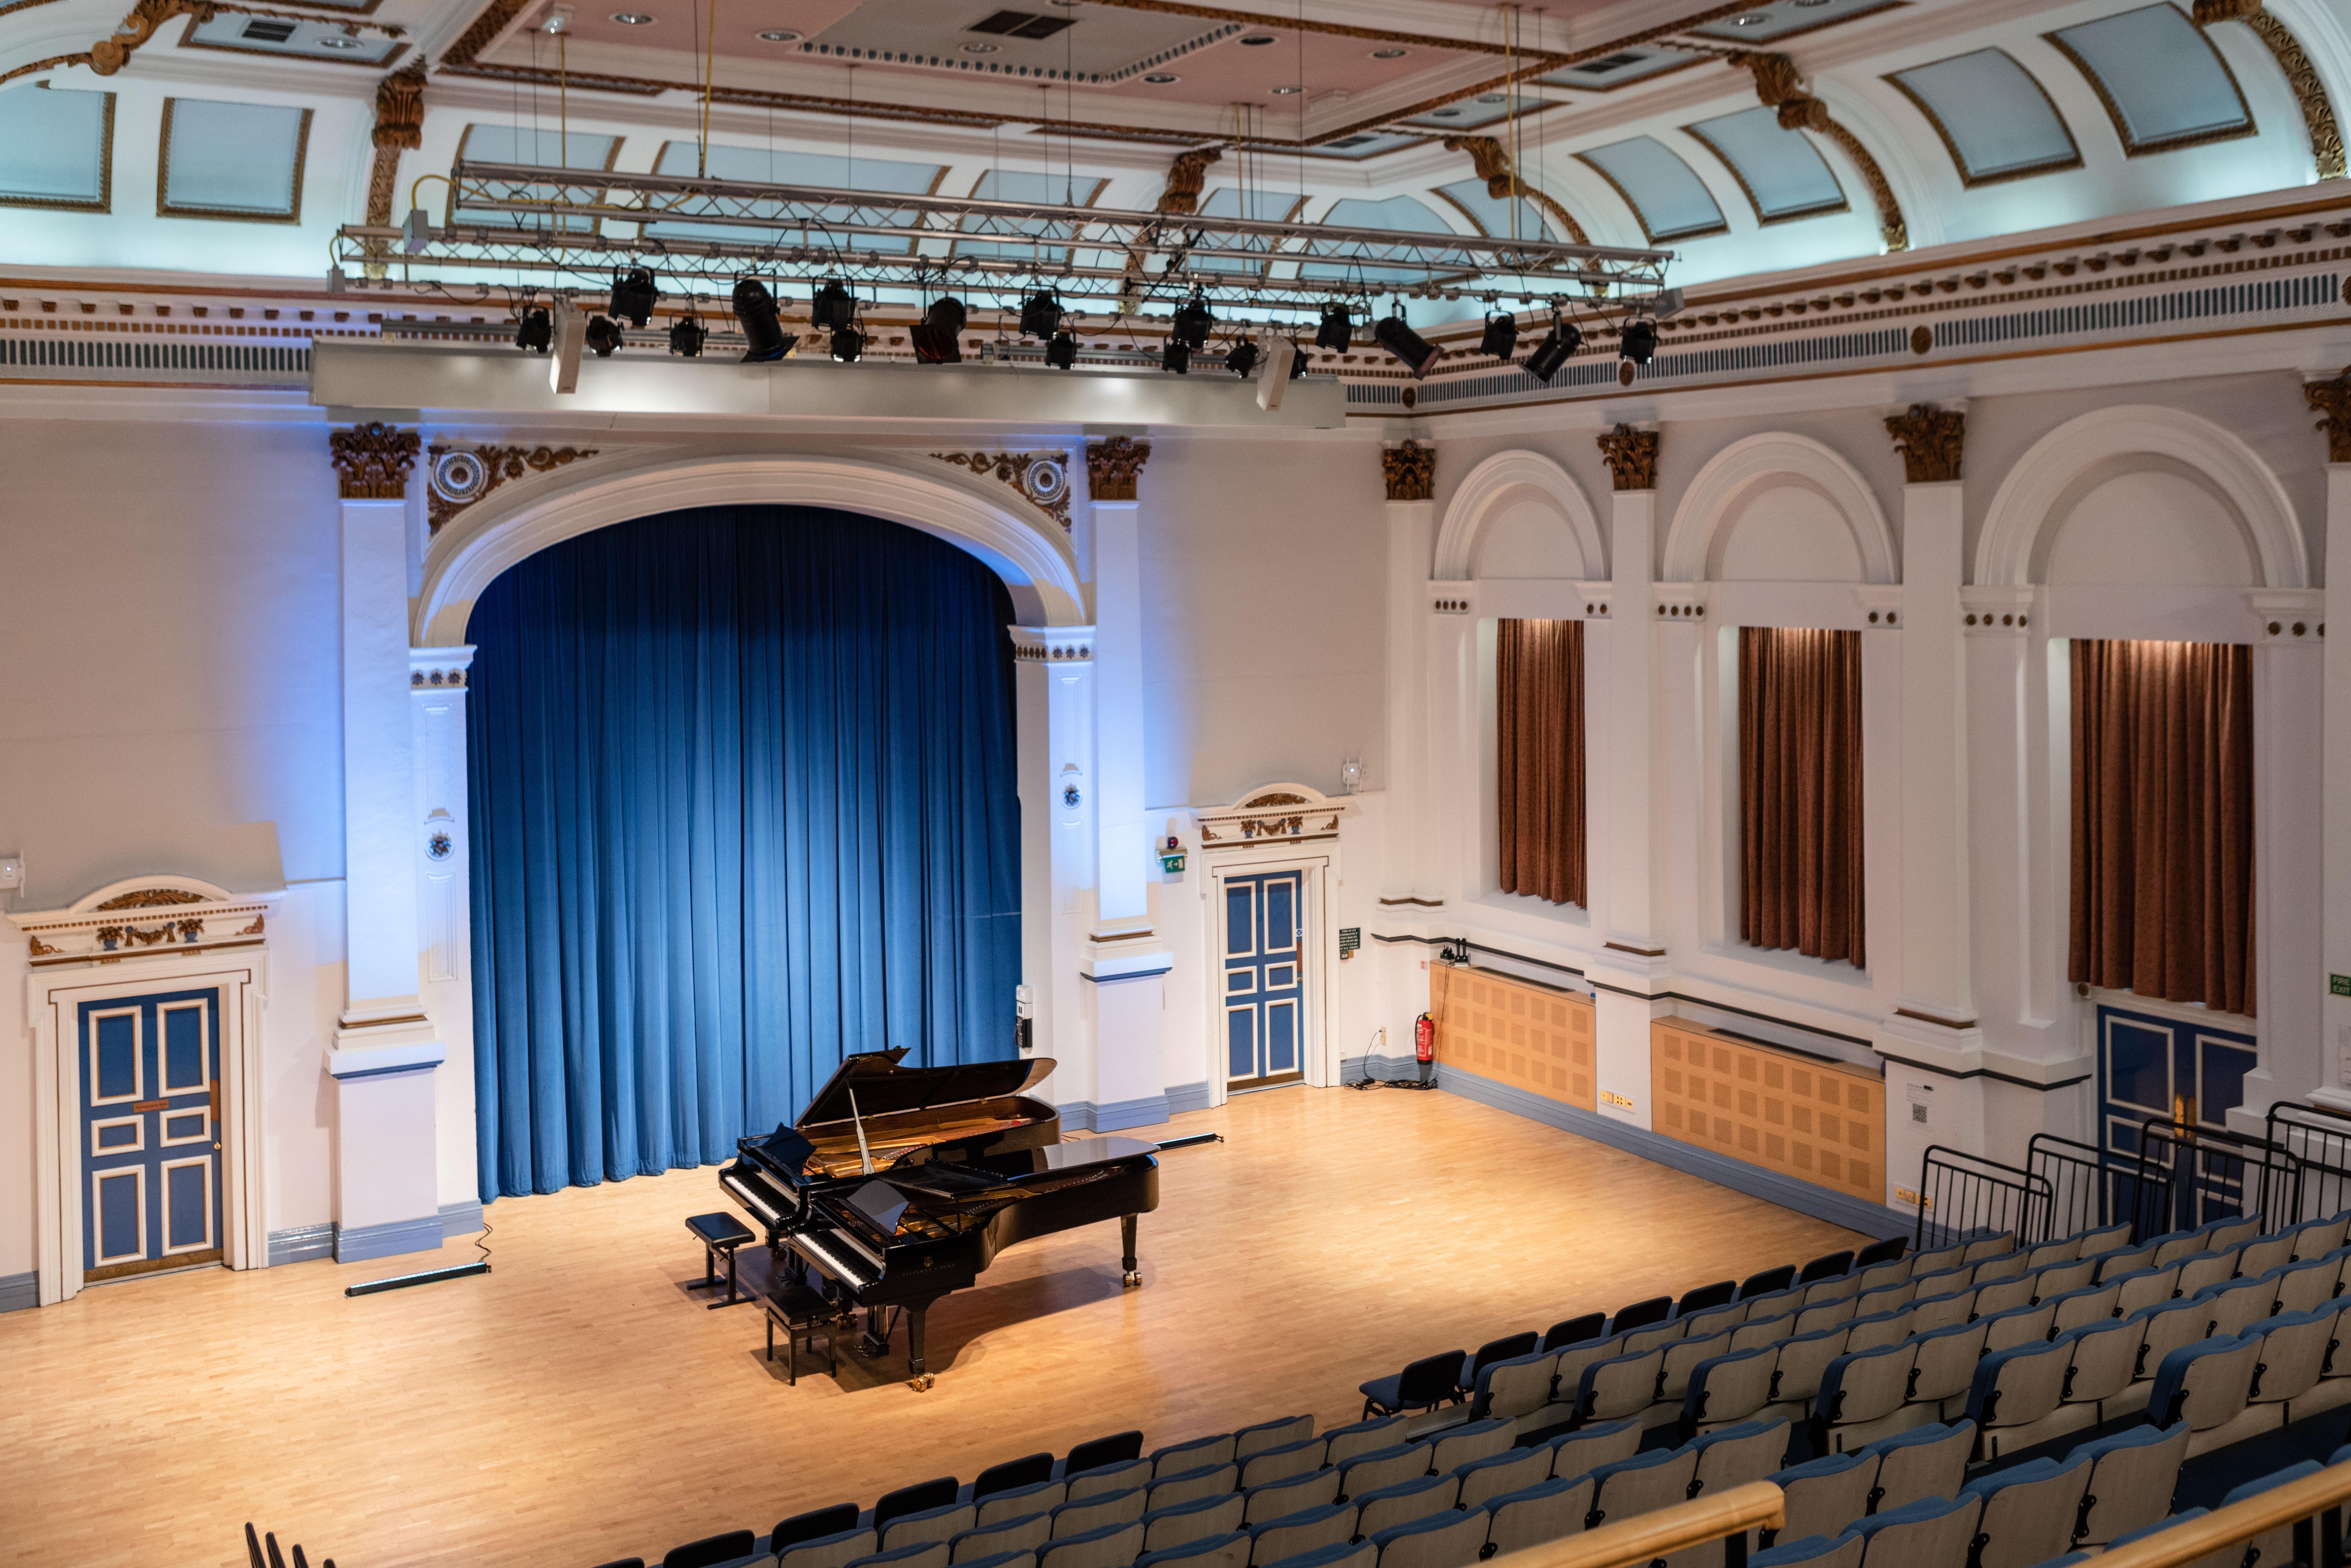 Image from balcony of the Concert Hall showing seating, stage area, pianos and lighting.